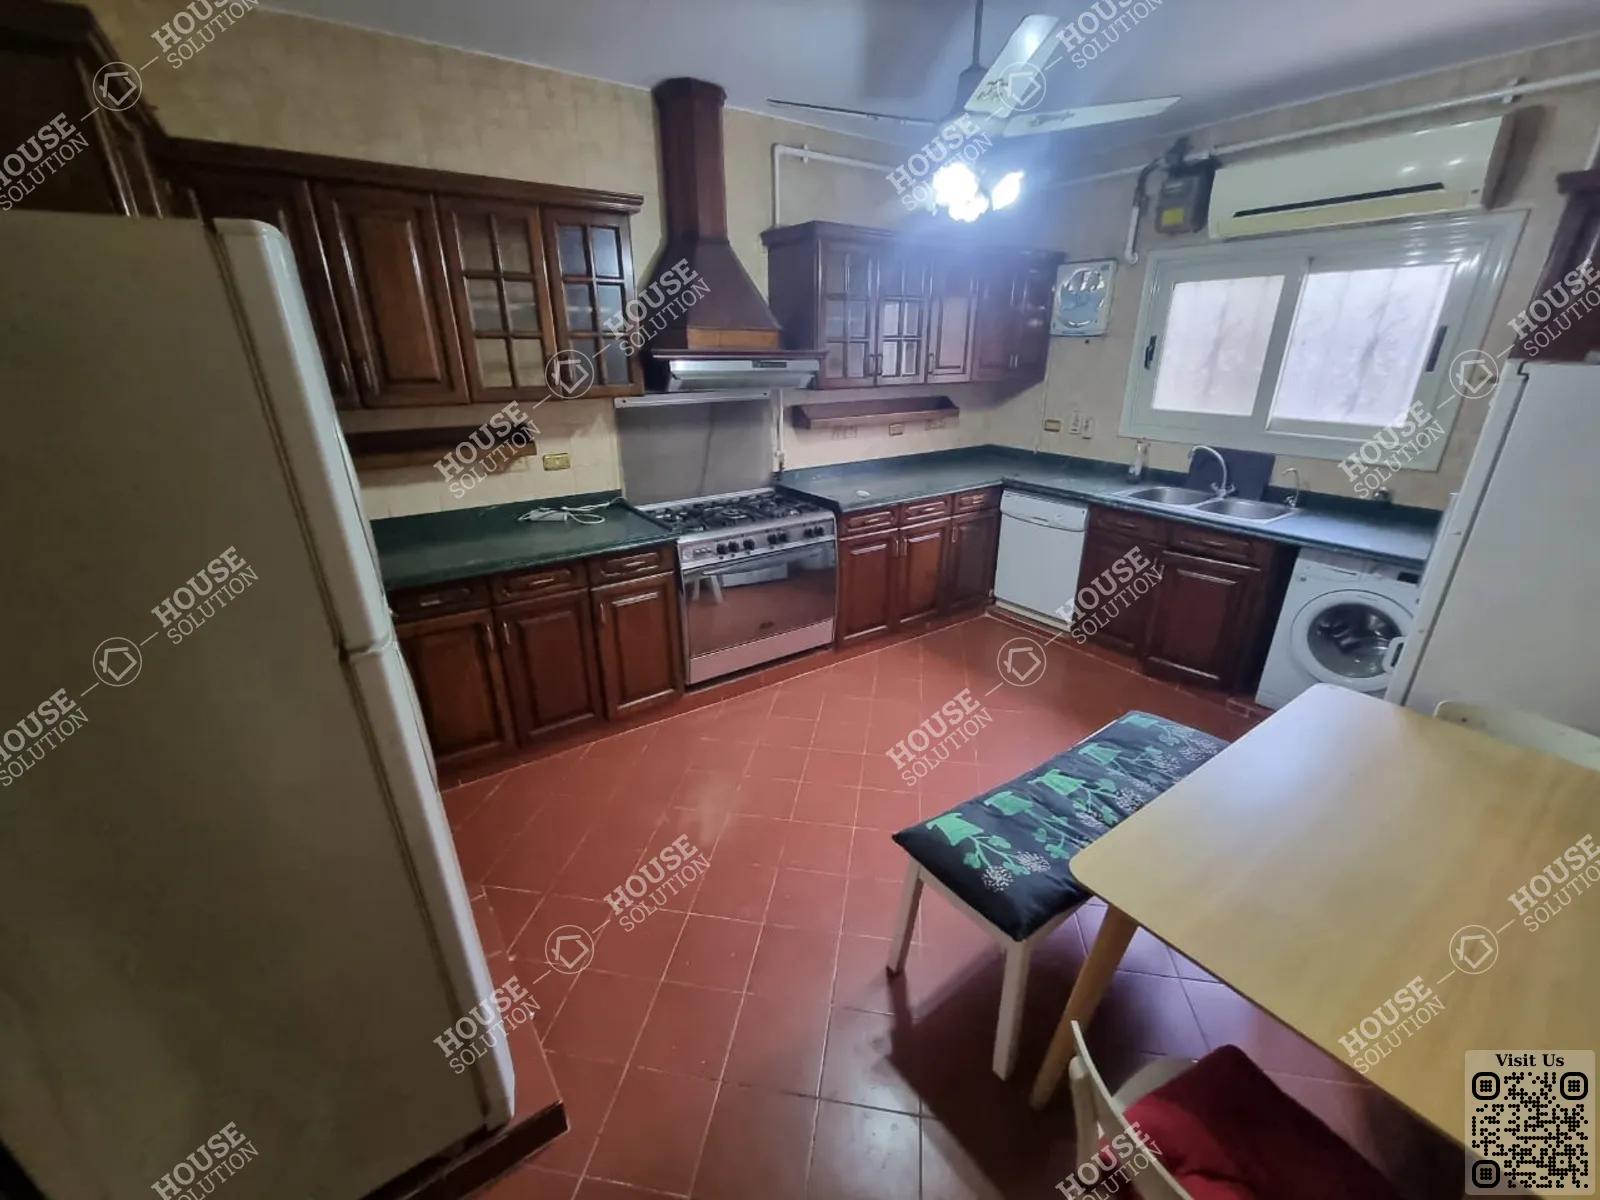 KITCHEN  @ Apartments For Rent In Maadi Maadi Degla Area: 220 m² consists of 3 Bedrooms 3 Bathrooms Modern furnished 5 stars #5779-2